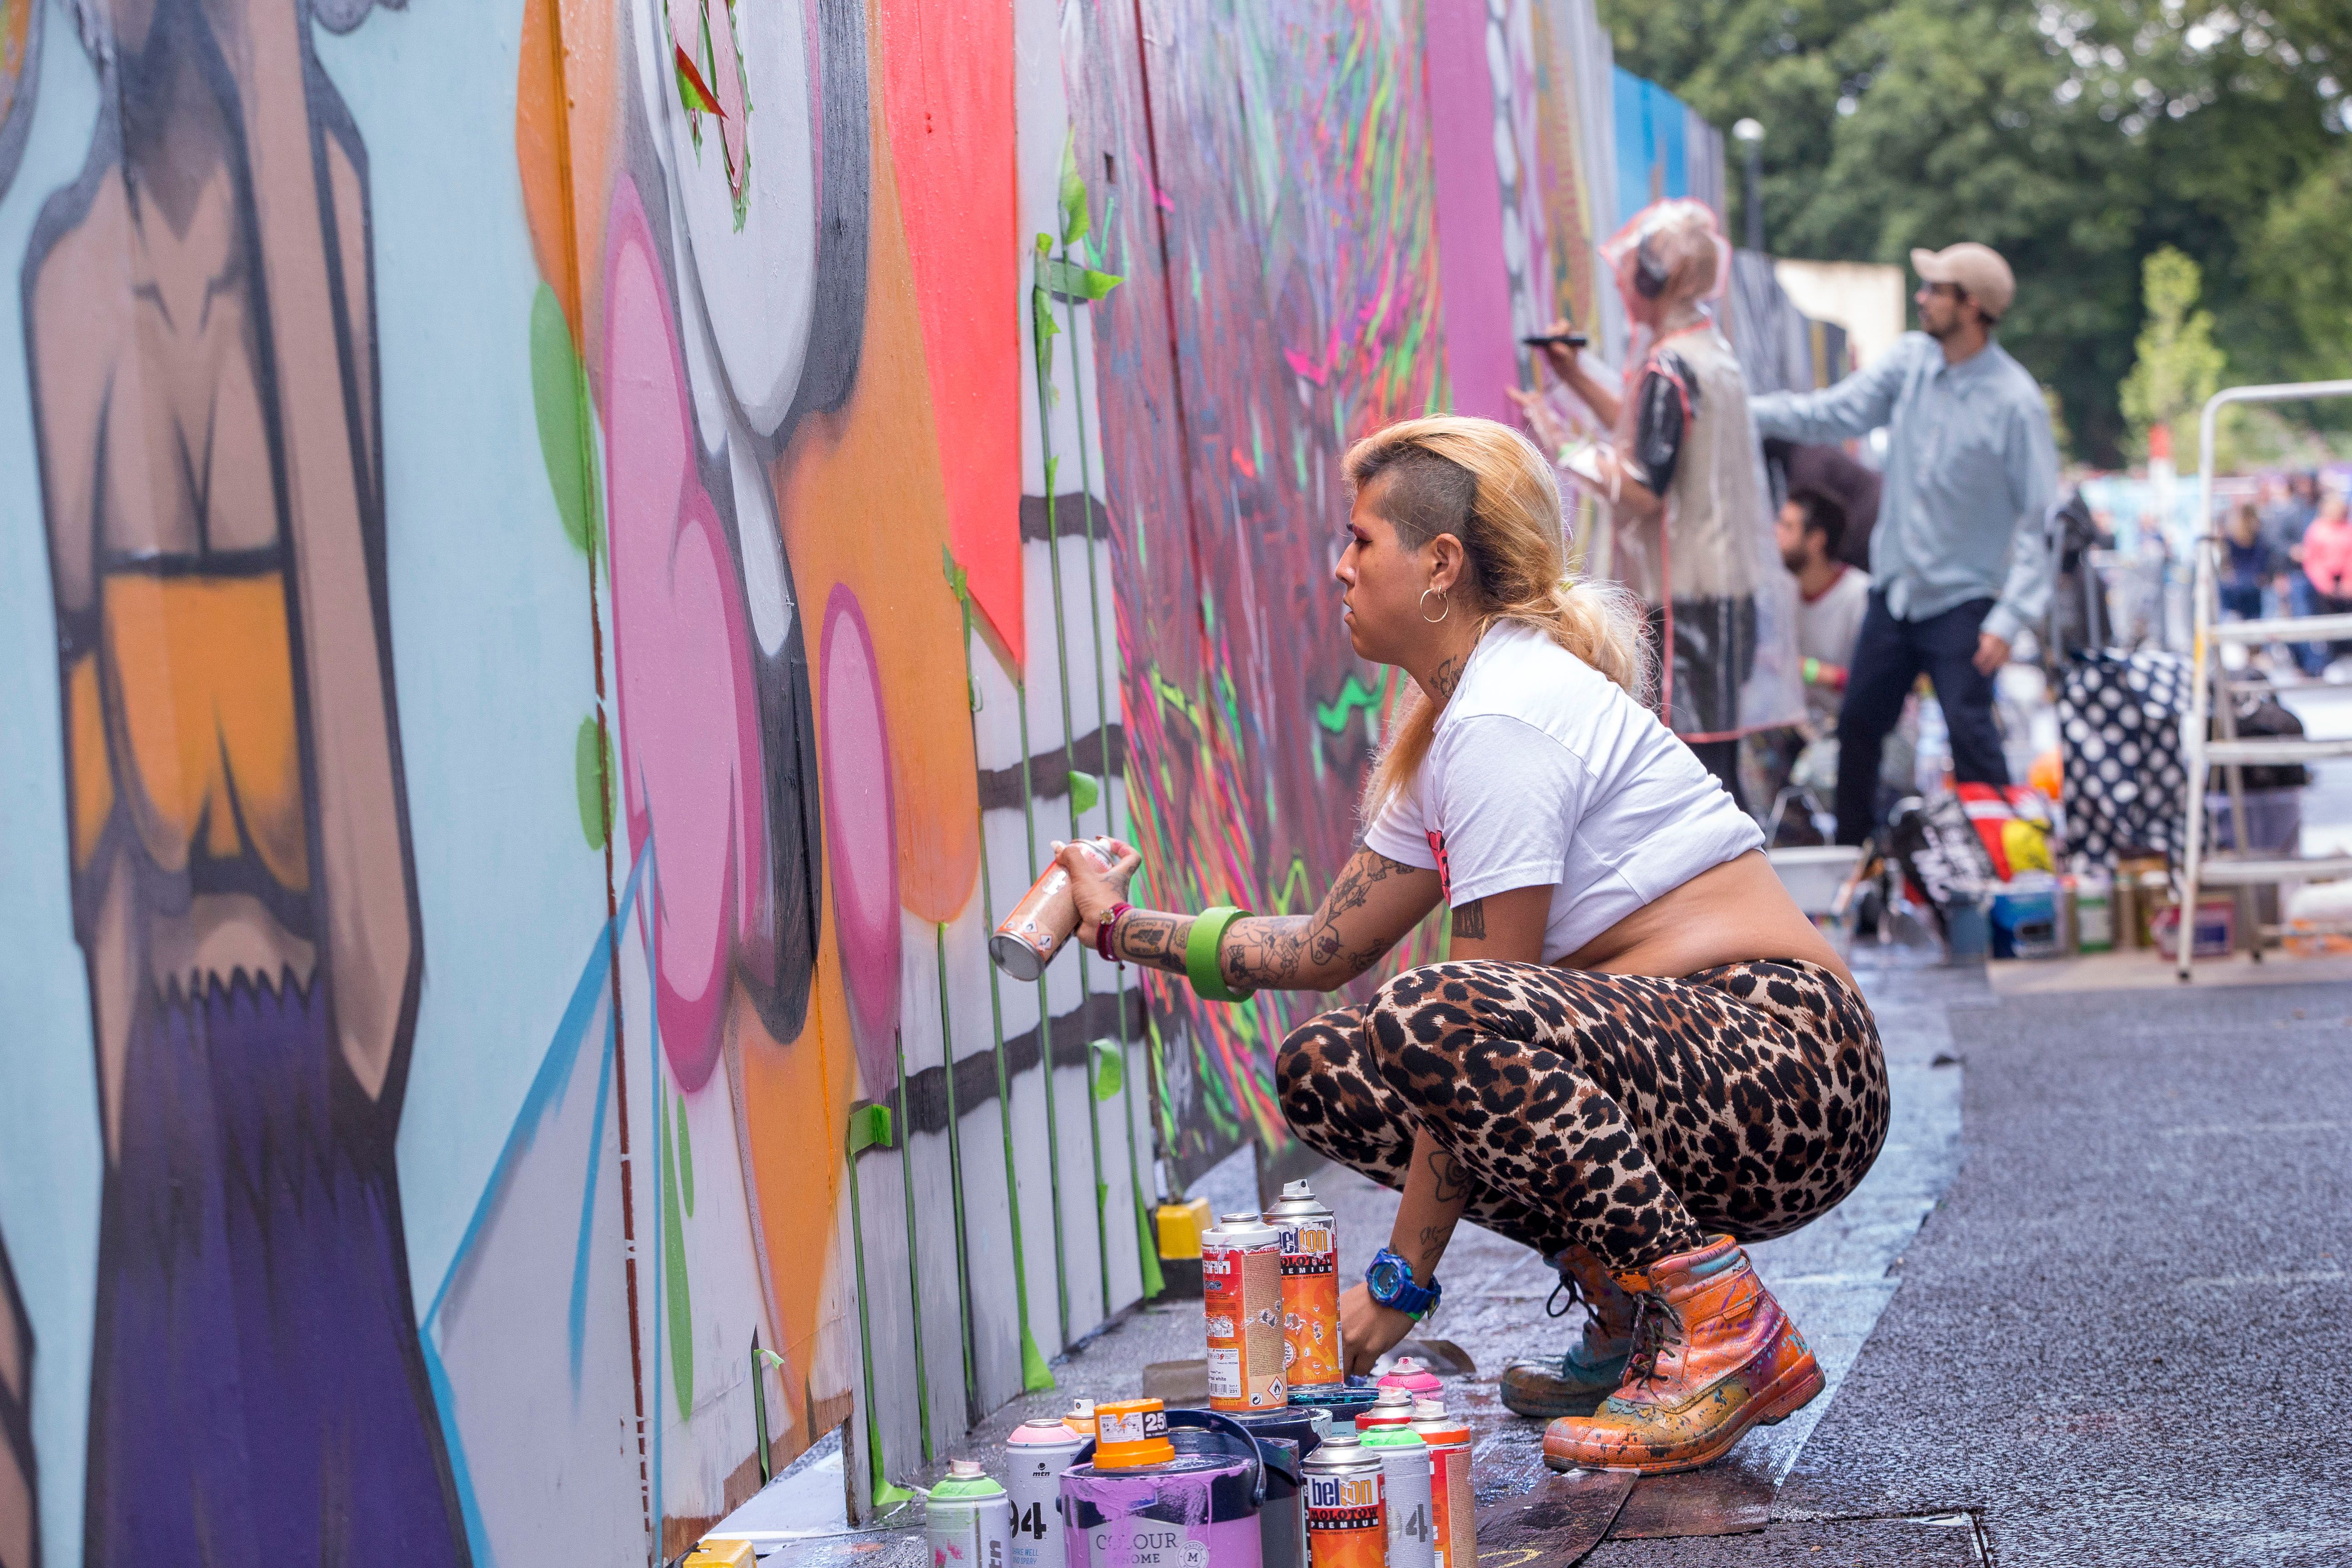 Upfest returns for 15th year anniversary in 2022